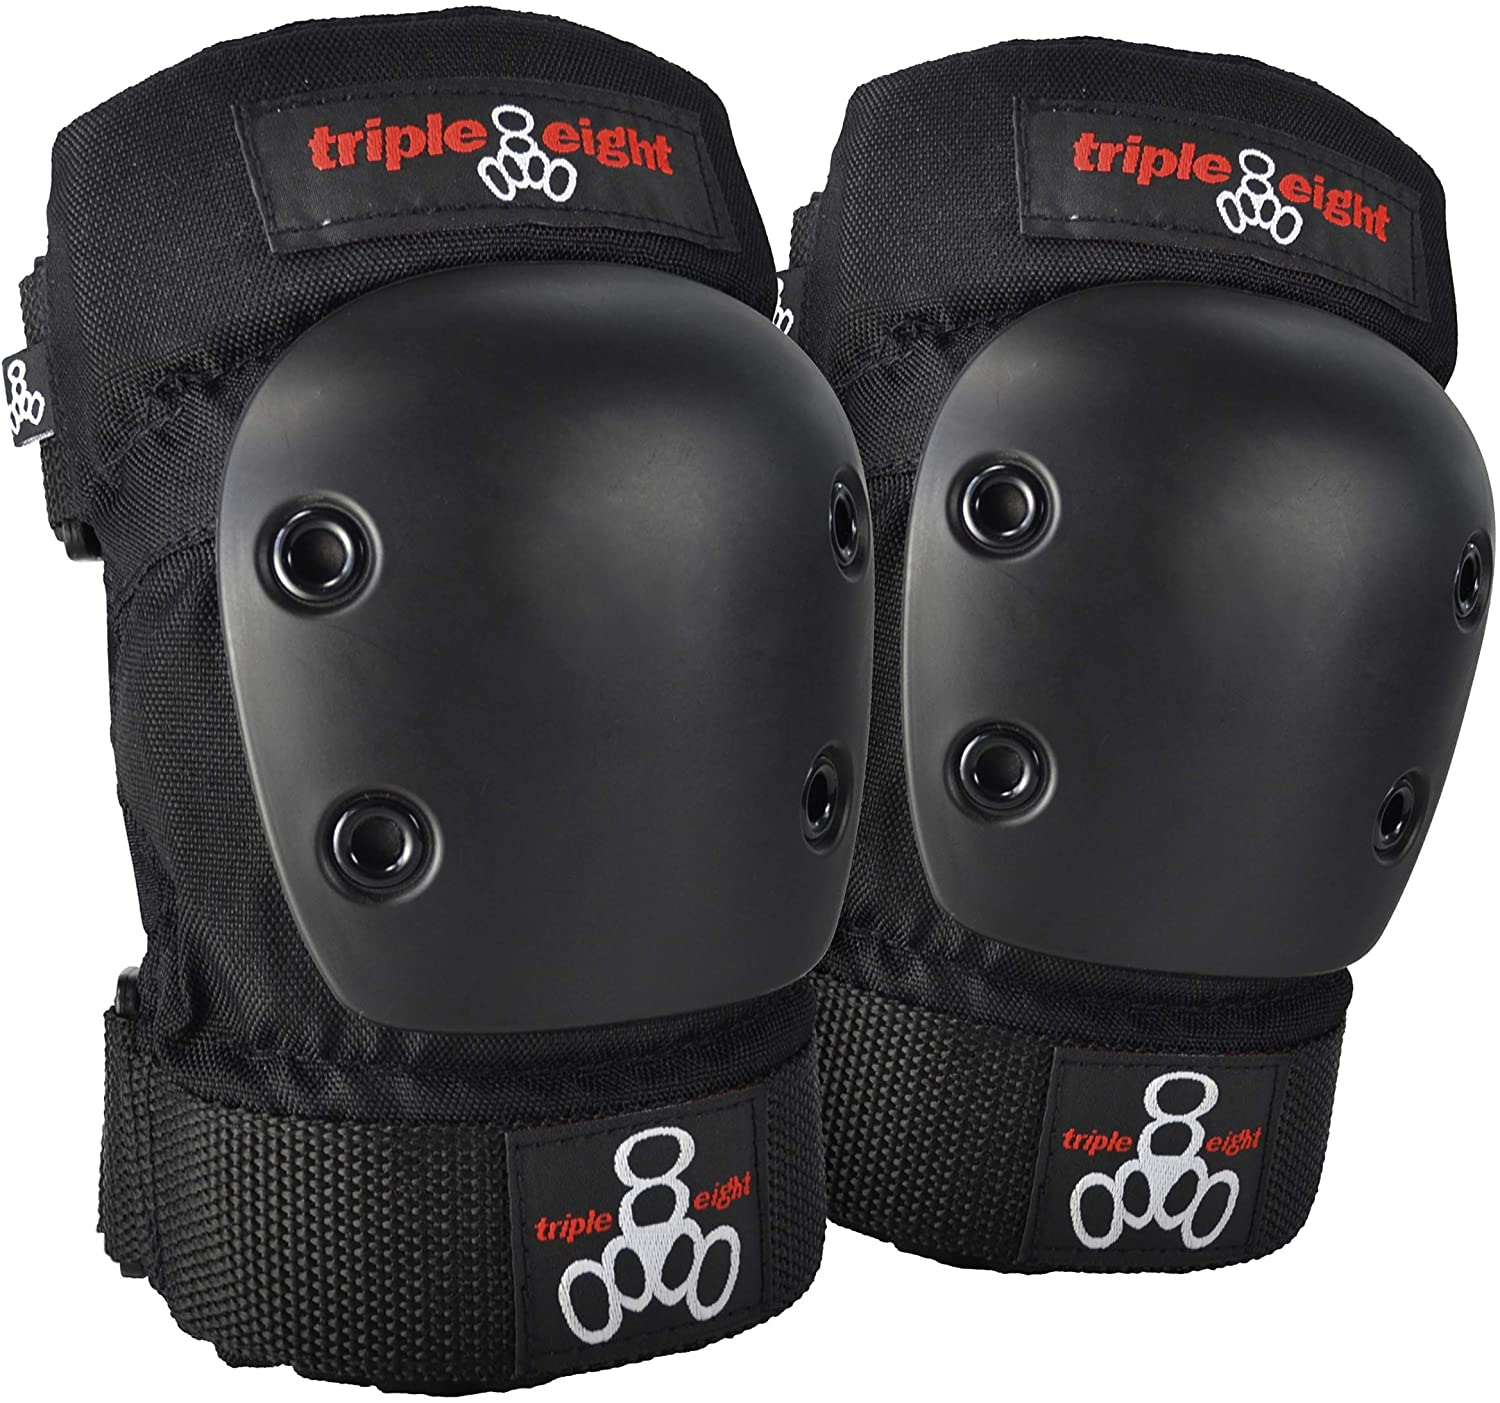 Hardshell elbow guards like these provide better protection for the elbow area than a soft-shell design.